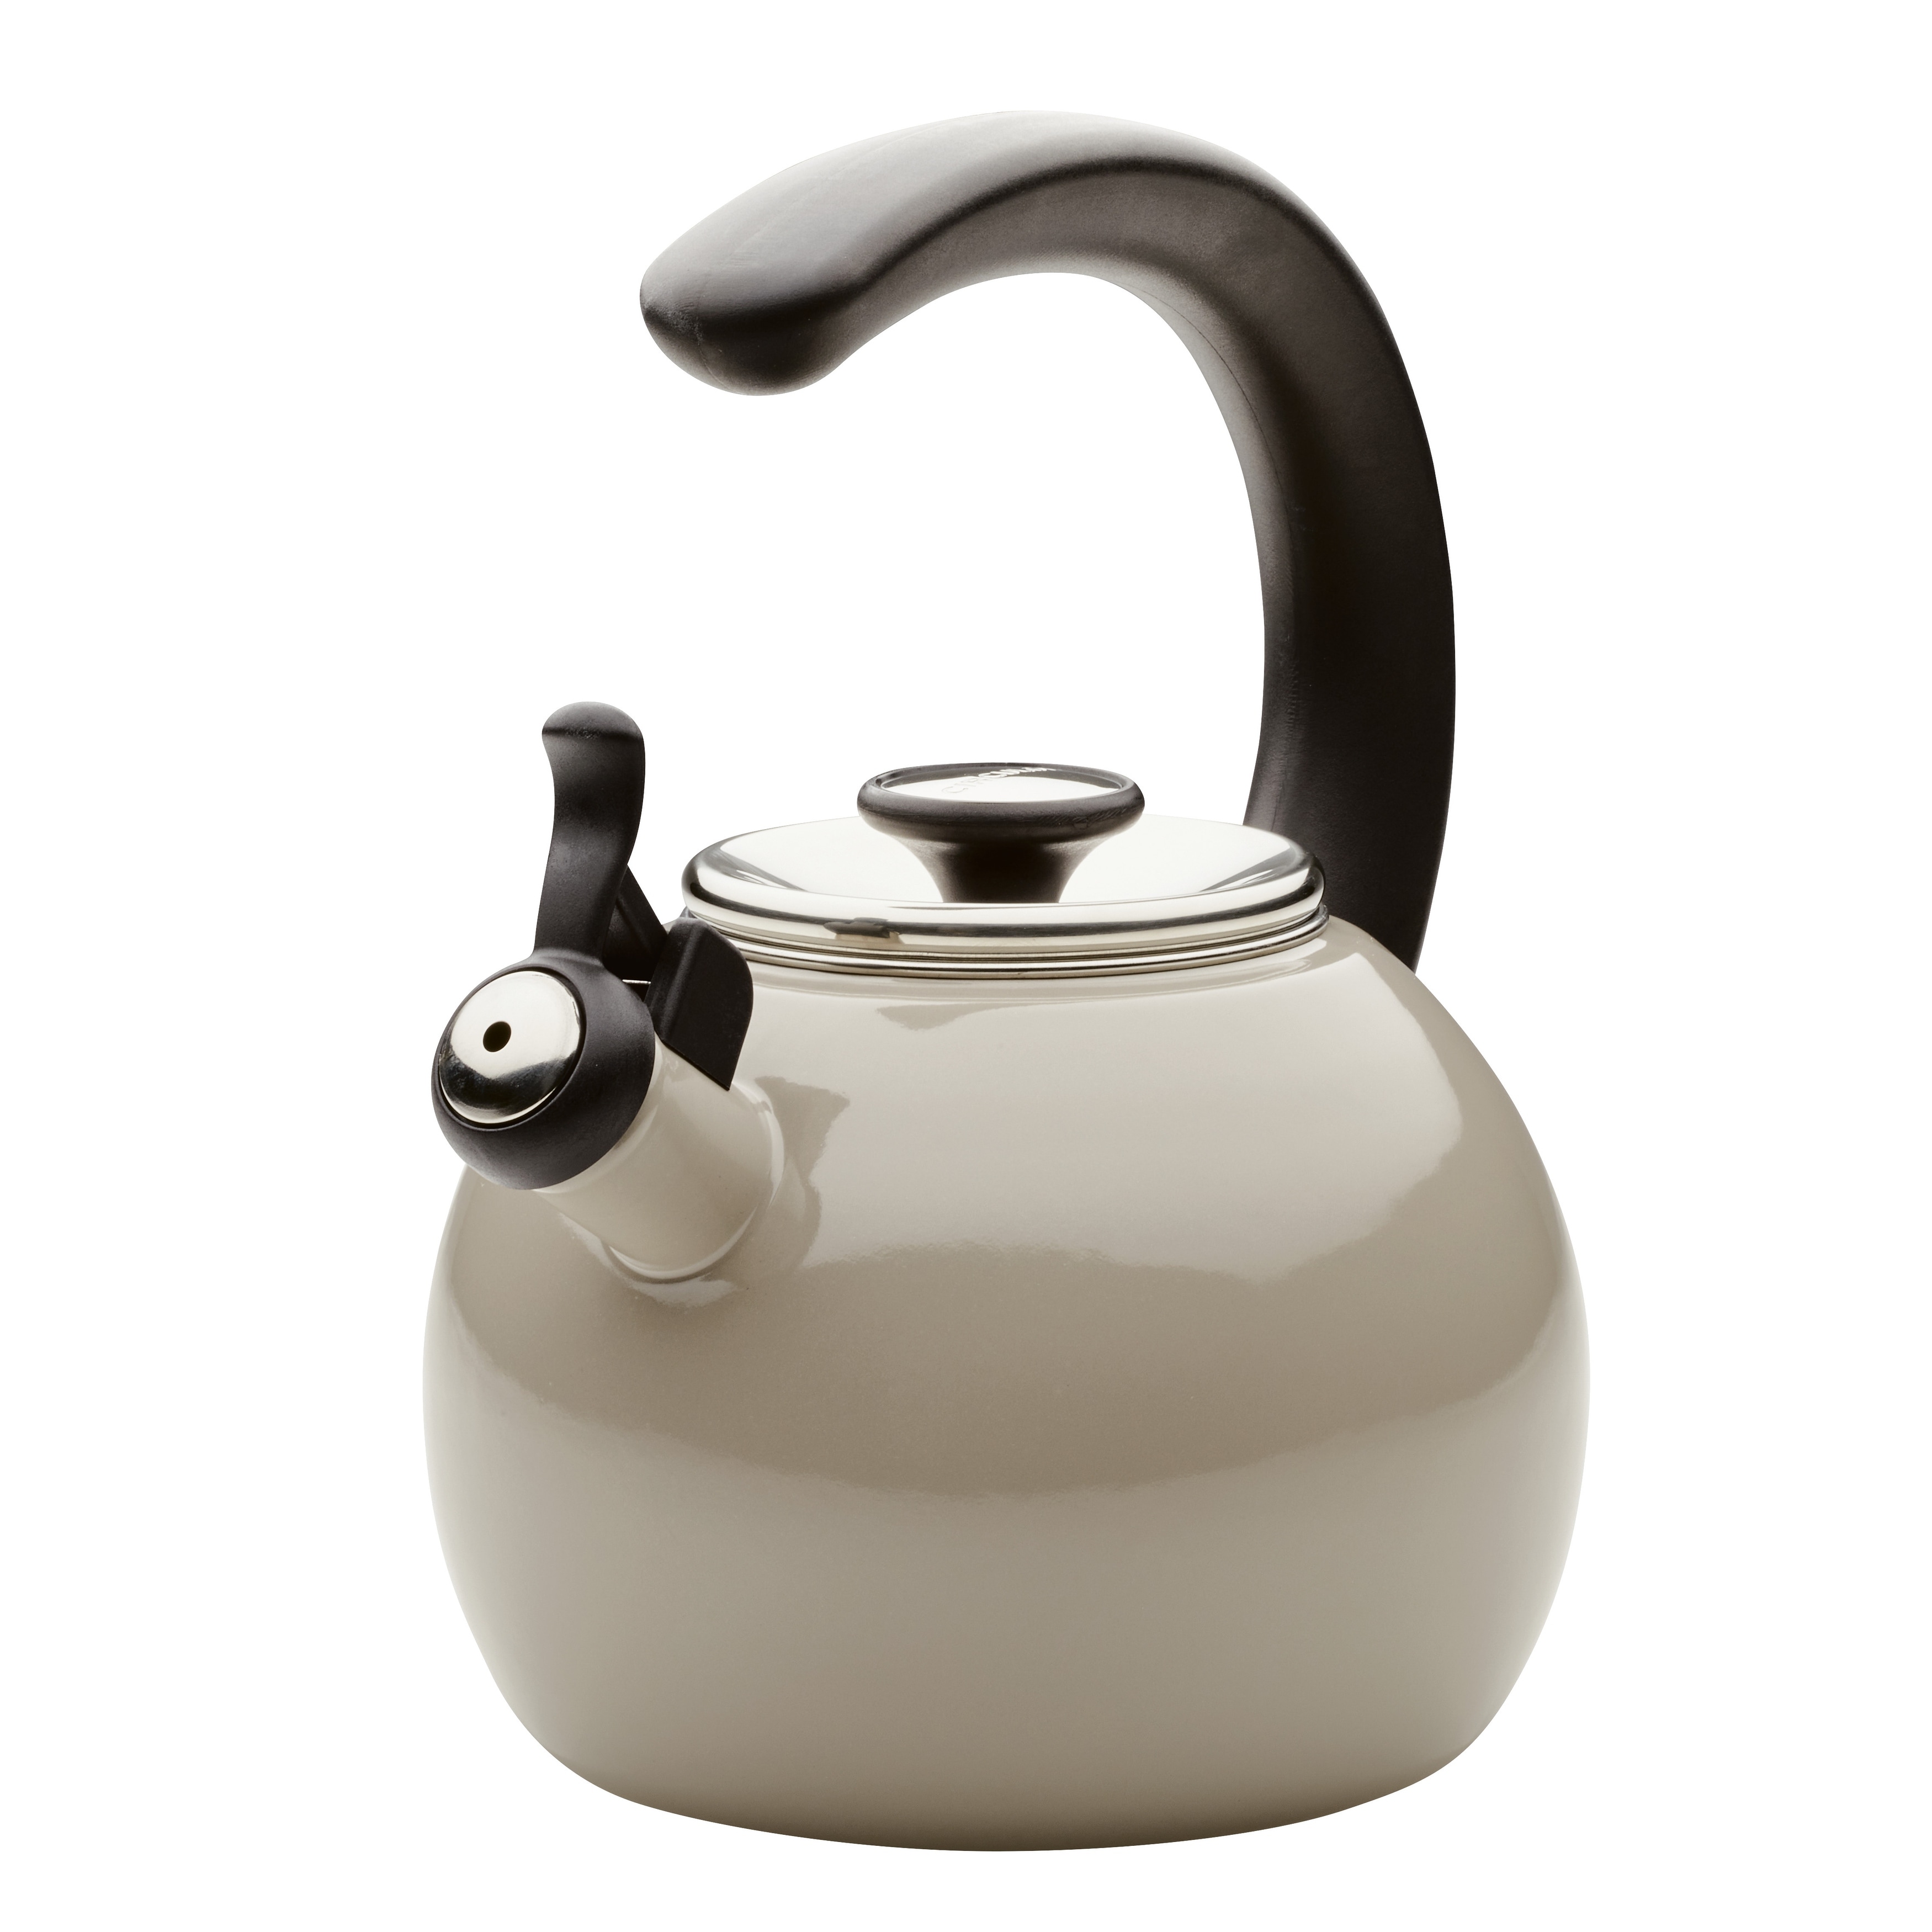 https://ak1.ostkcdn.com/images/products/is/images/direct/b9bbbdc8f30dd700be86c853e5fac0a20567371e/Circulon-Enamel-on-Steel-Whistling-Induction-Teakettle-With-Flip-Up-Spout%2C-2-Quart%2C-Gray.jpg